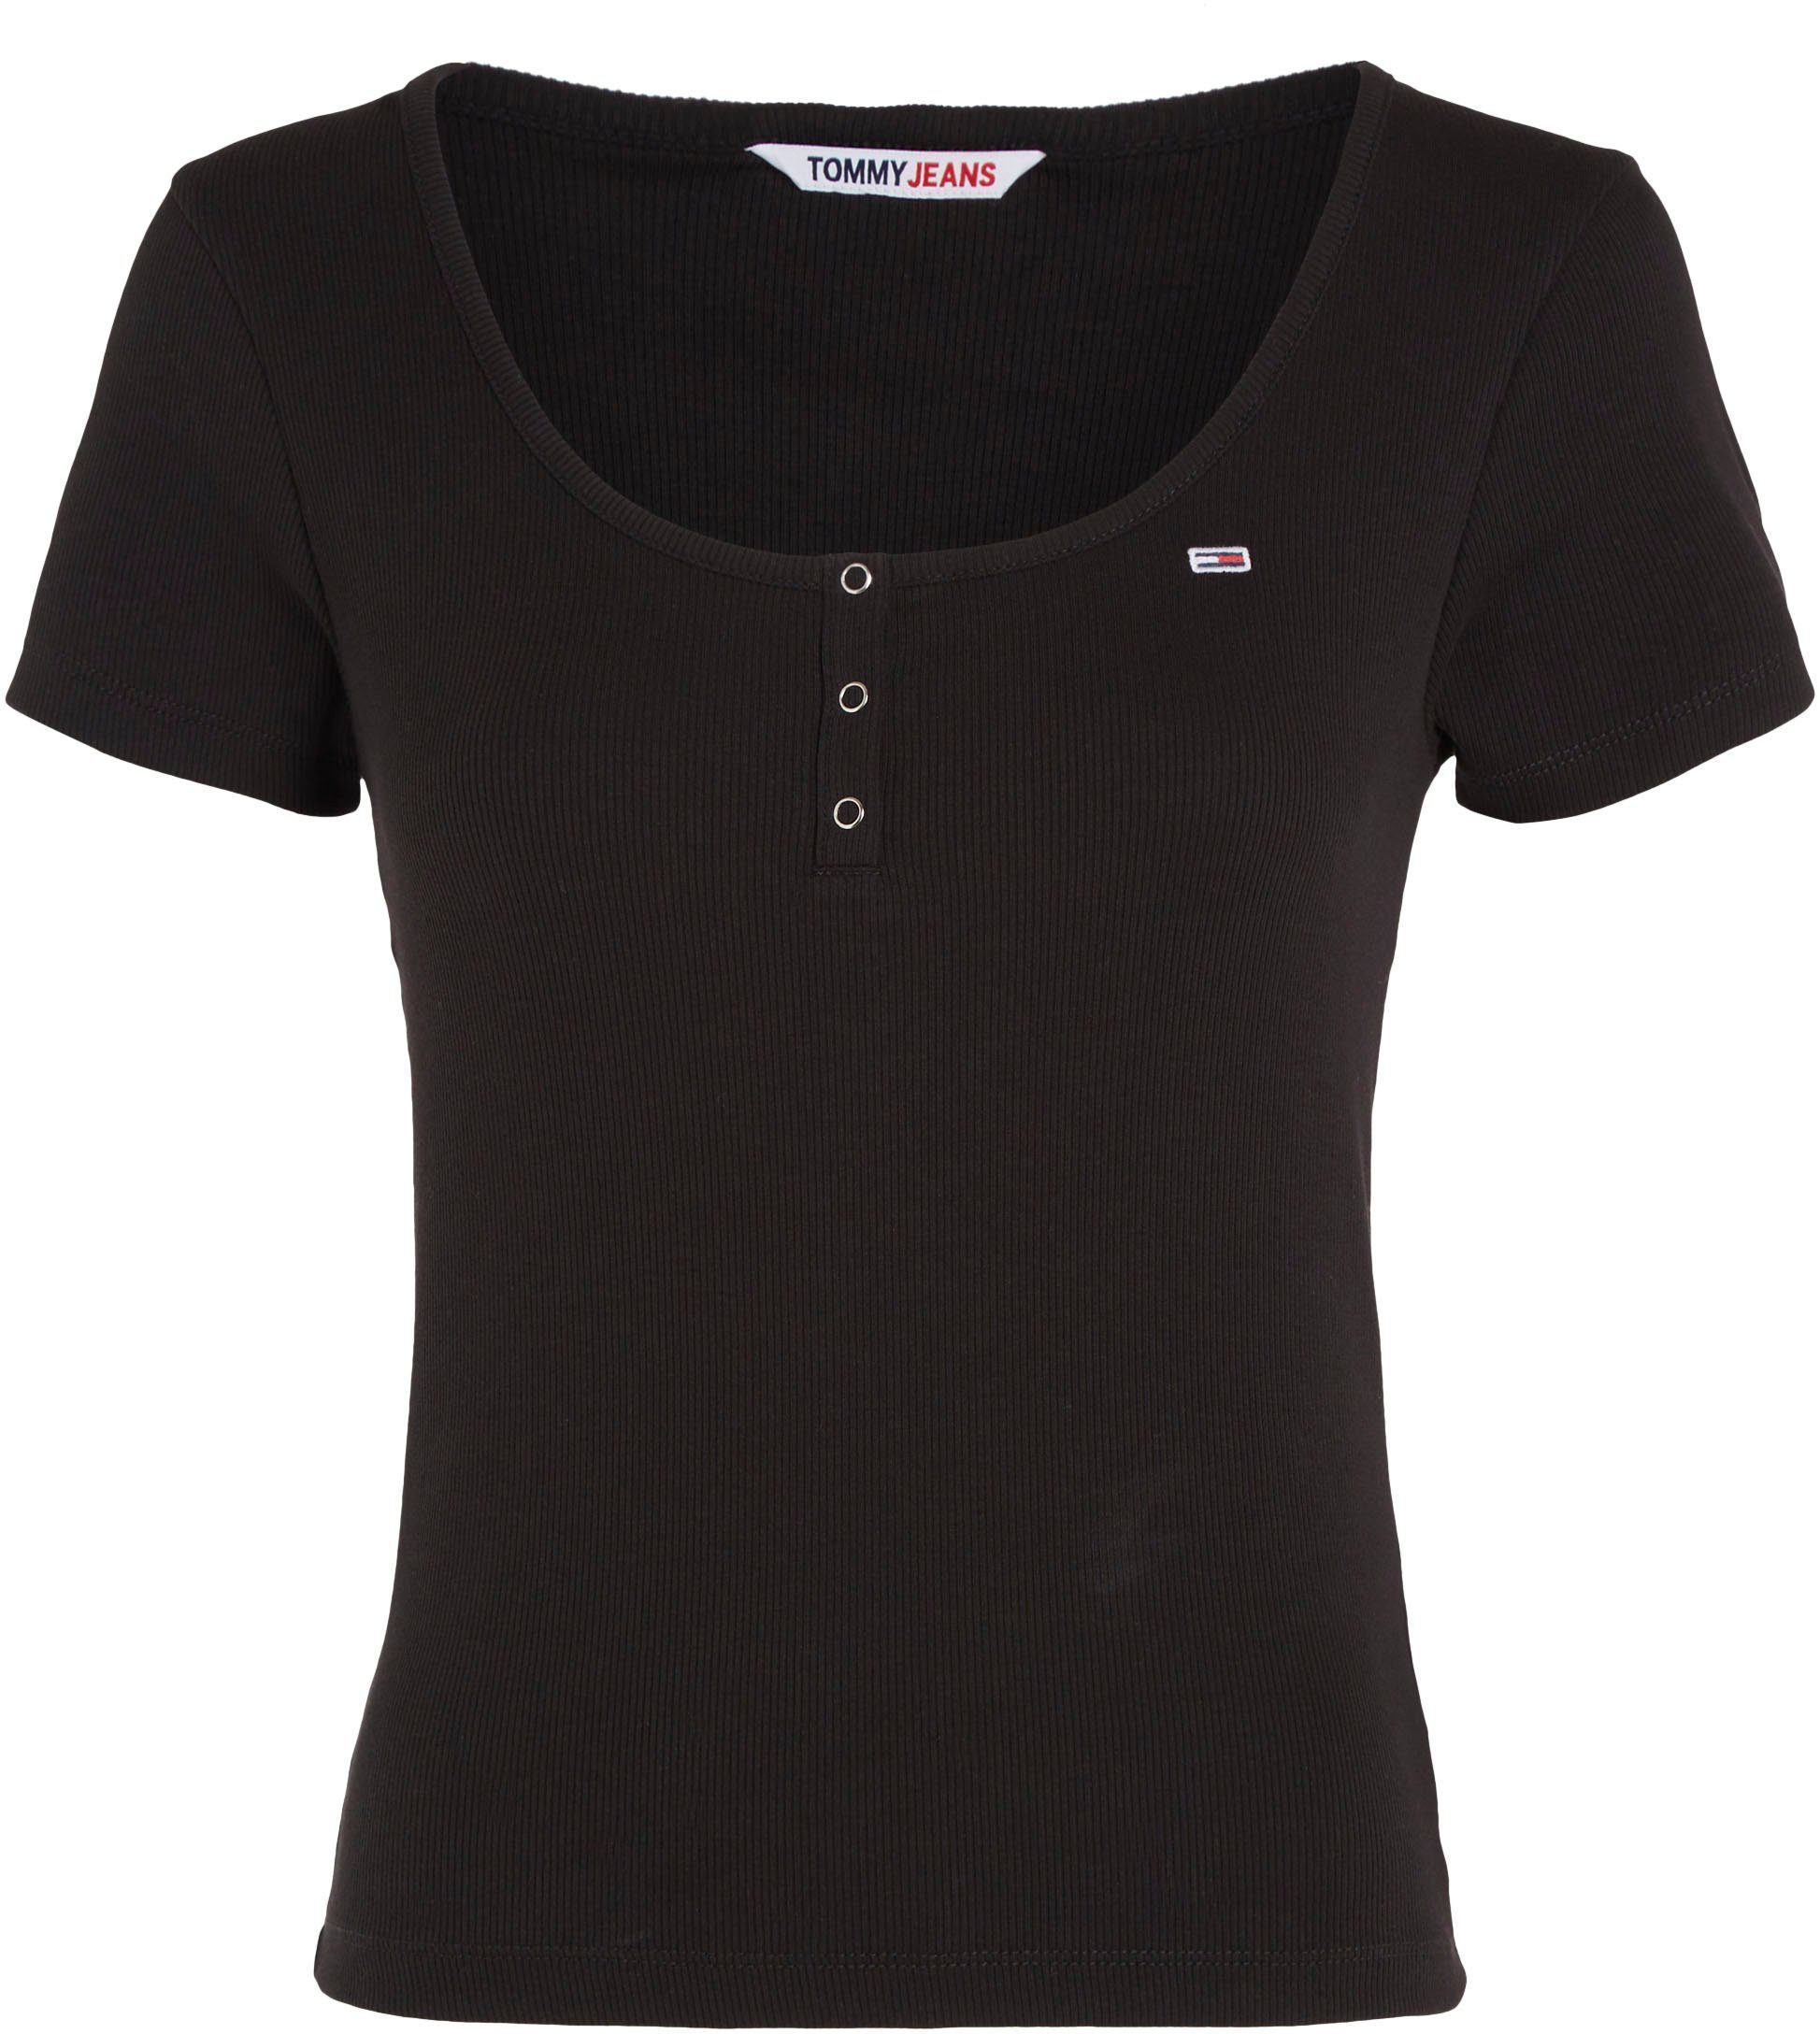 Tommy Jeans RIB Logostickerei C-NECK Jeans TJW Tommy BBY mit T-Shirt BUTTON Black